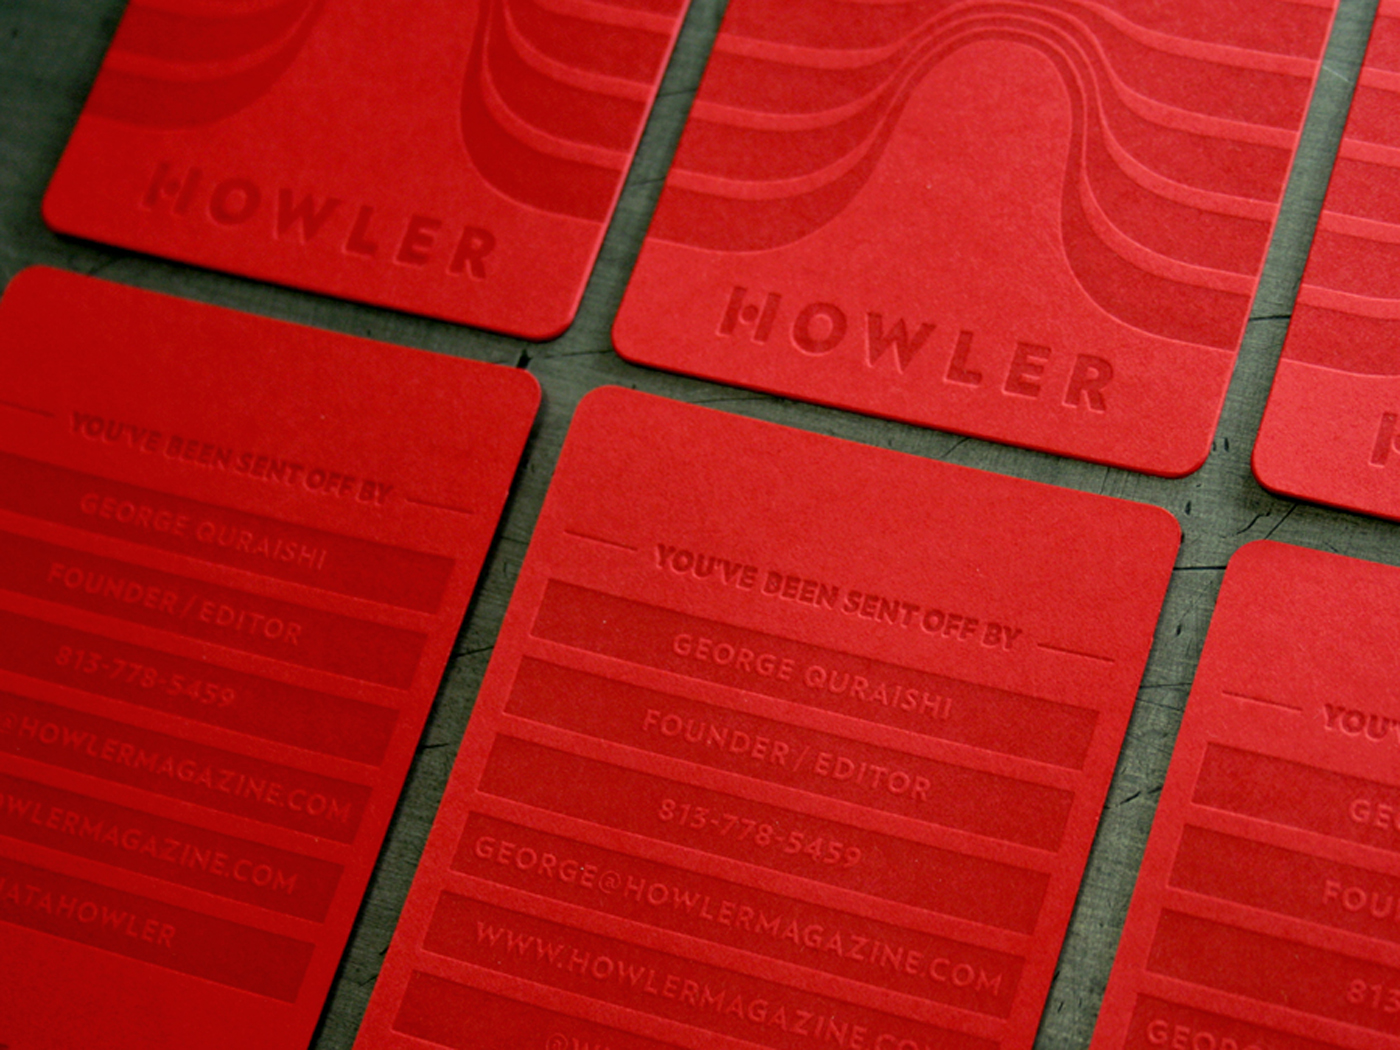 whatahowler soccer football howler letterpress Business Cards Printing Red Card yellow card 8by8mag